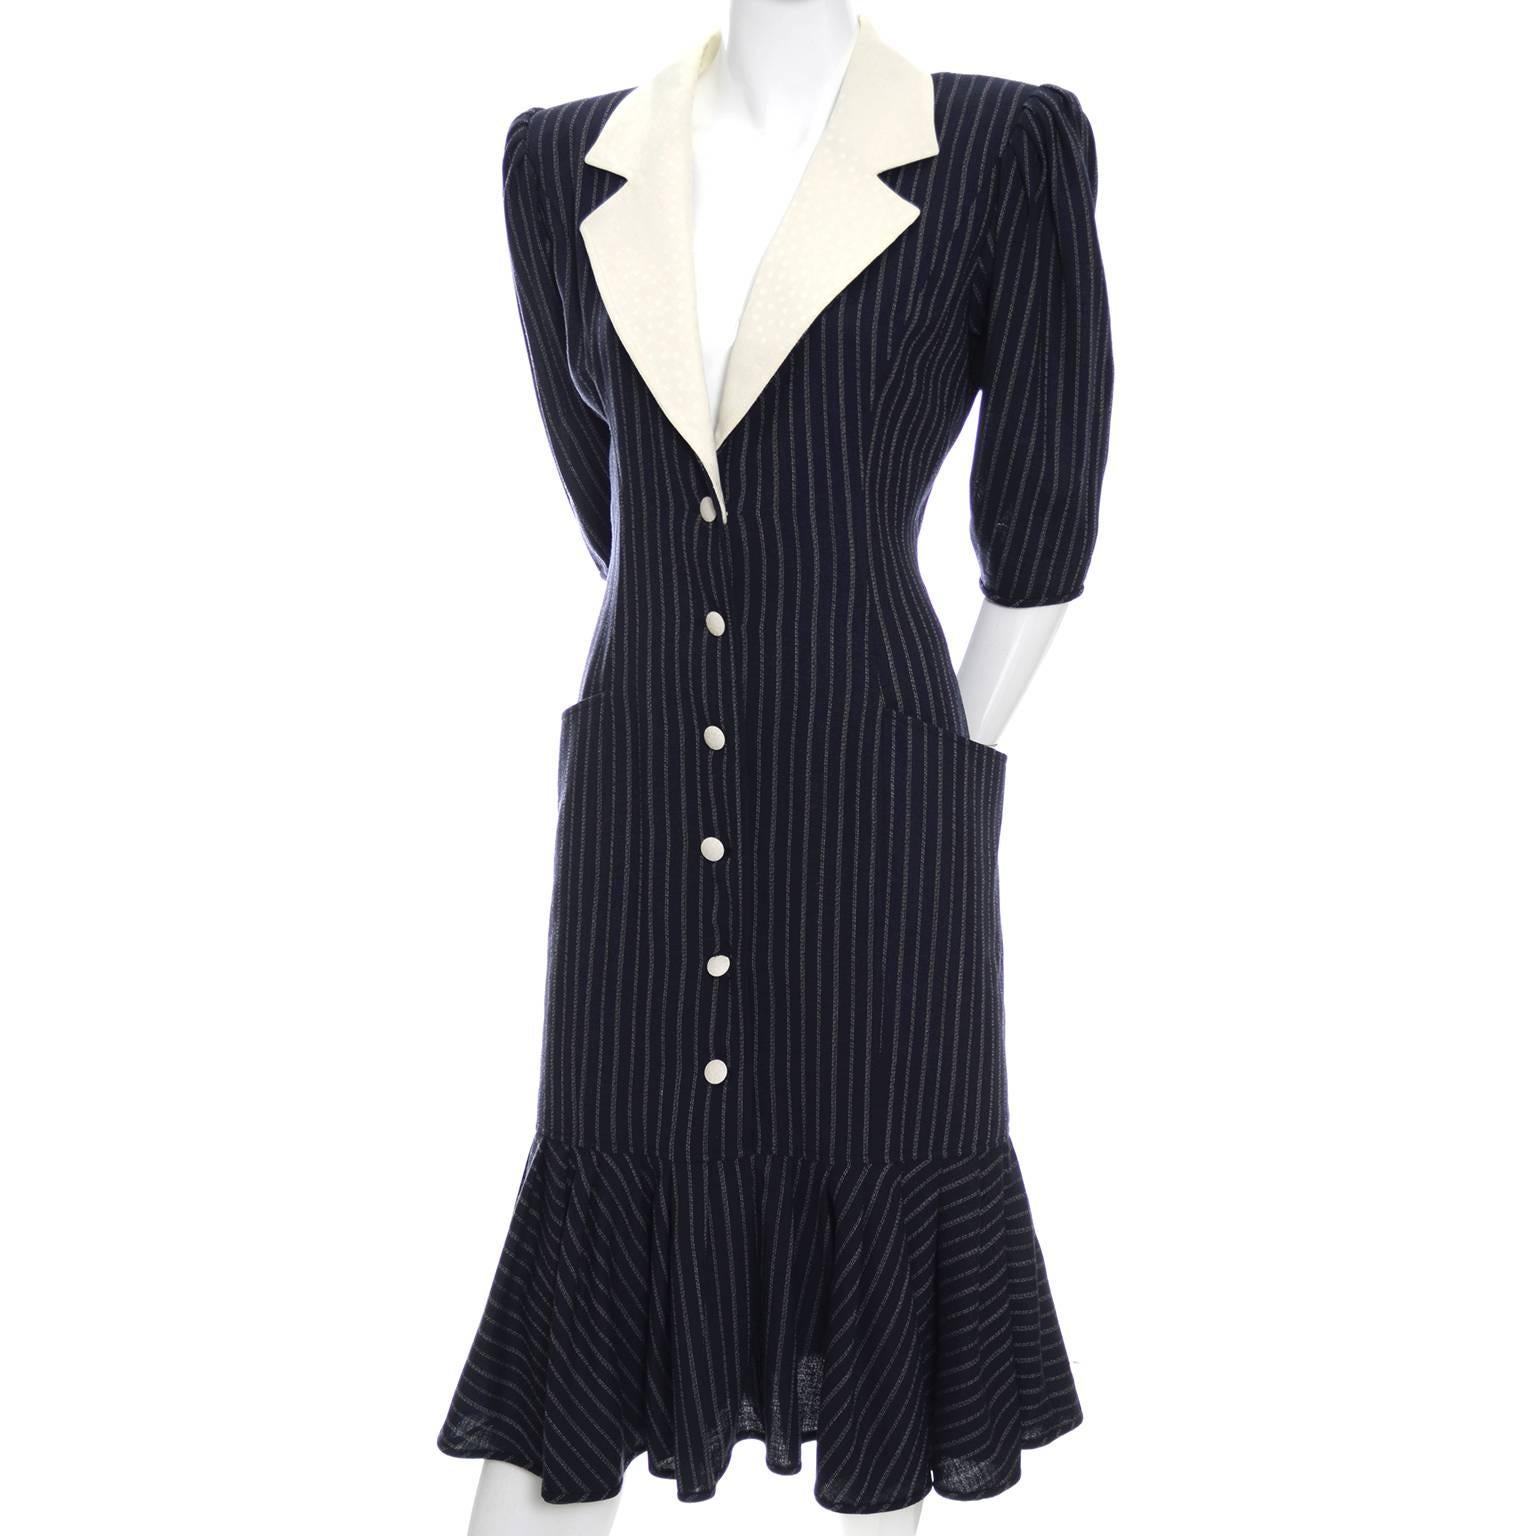 This vintage Ungaro dress is in as new condition and comes from the estate of some of the finest vintage designer clothing I've ever had the privilege of handling.  This navy blue pinstriped fine wool crepe dress is lined and has a tone on tone